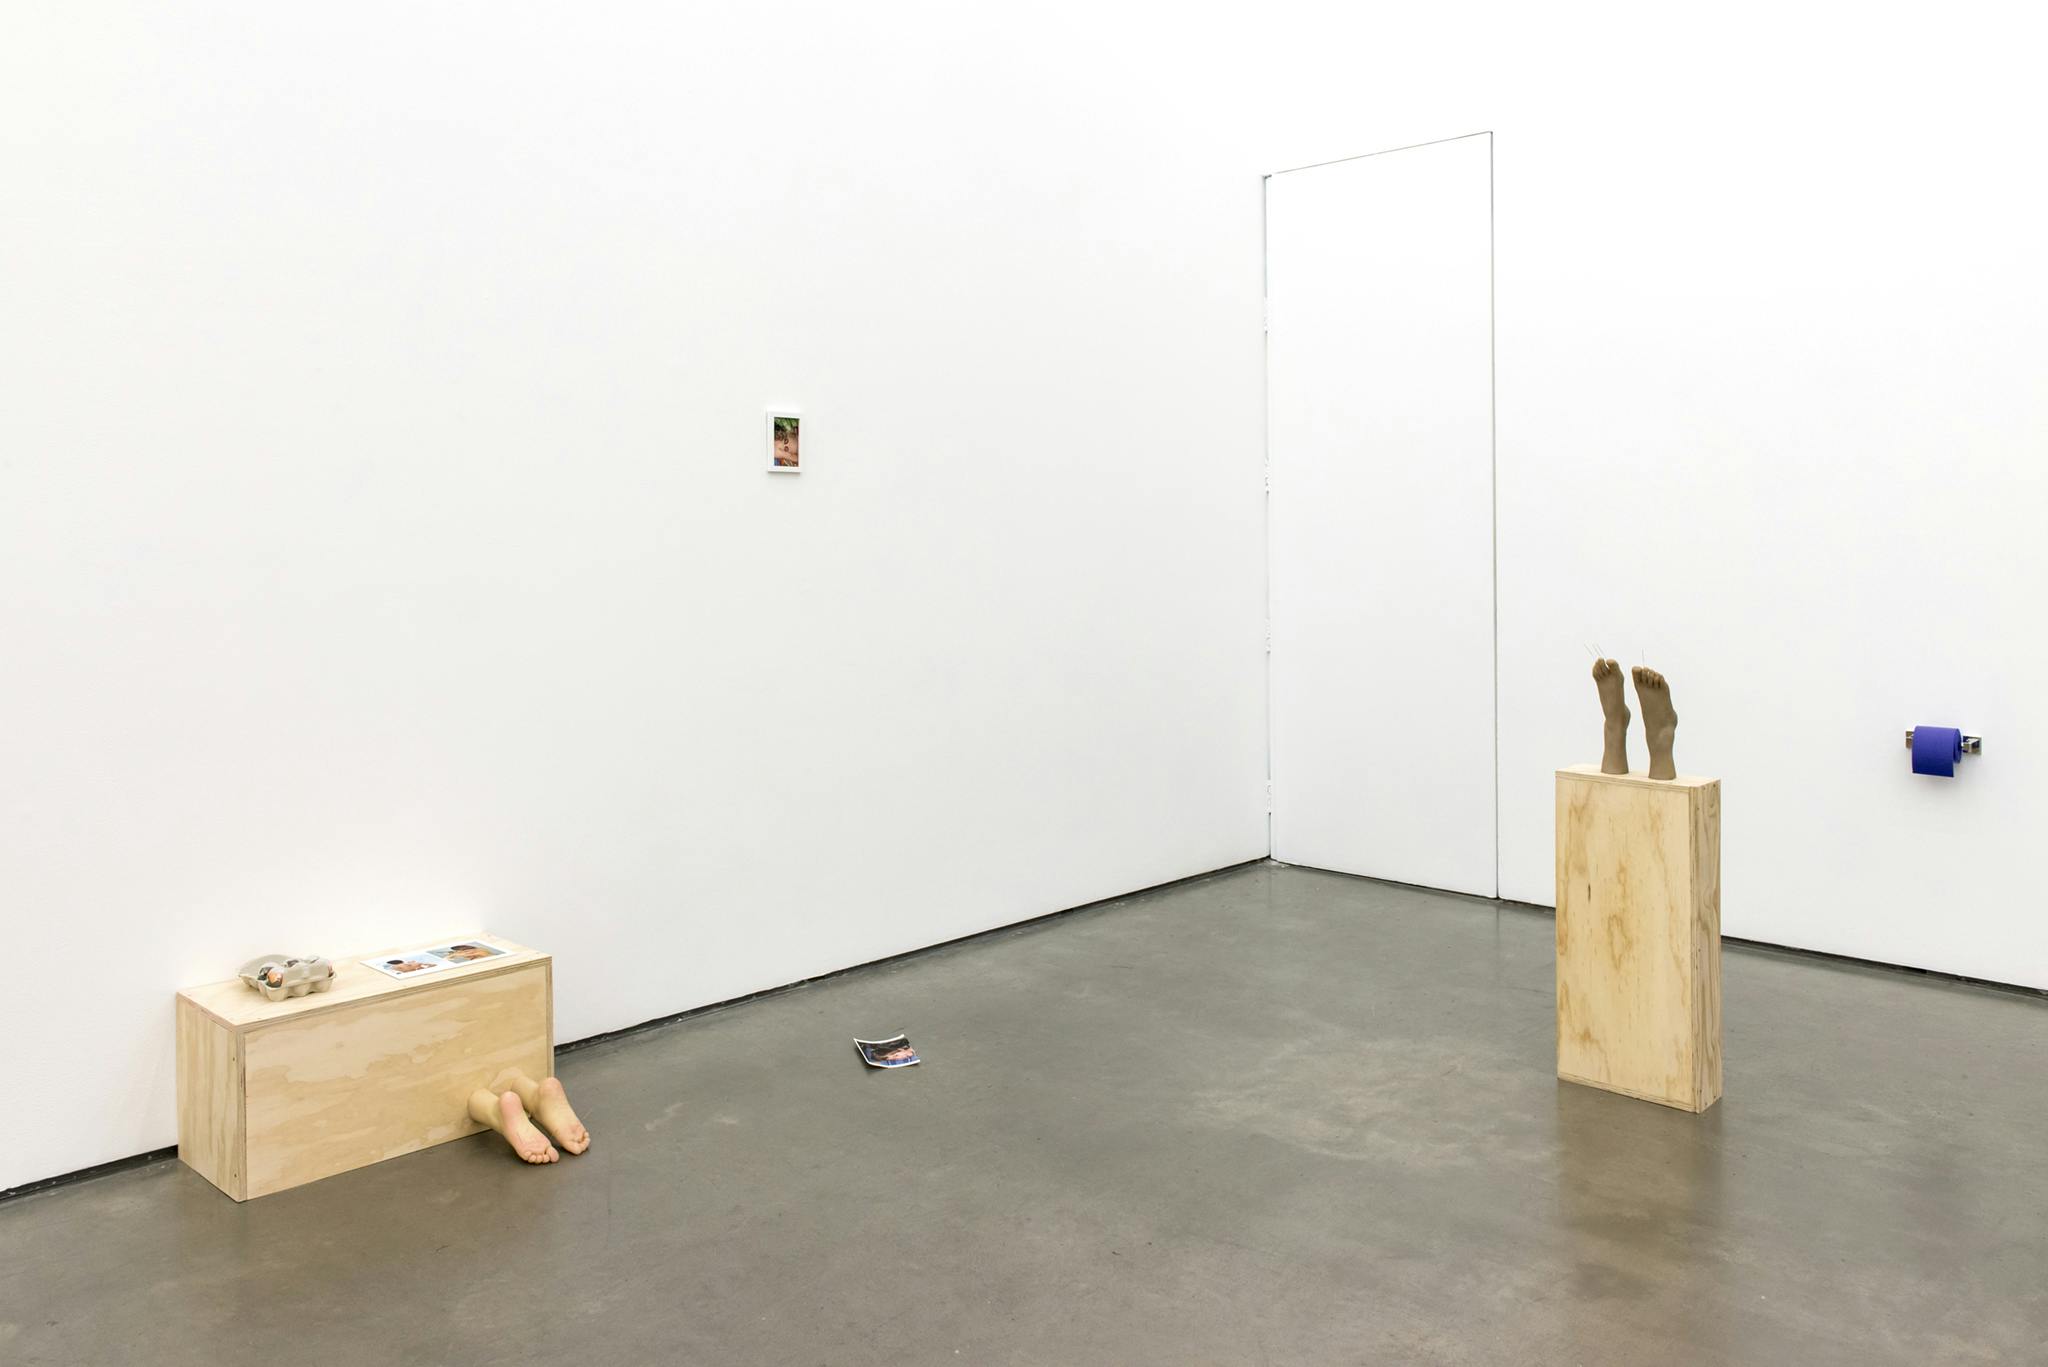 Two sculptures sit on the floor of a gallery space. The sculptures are made of wooden rectangular boxes with prosthetic feet protruding out of them. Four photographs are placed in various spots. 